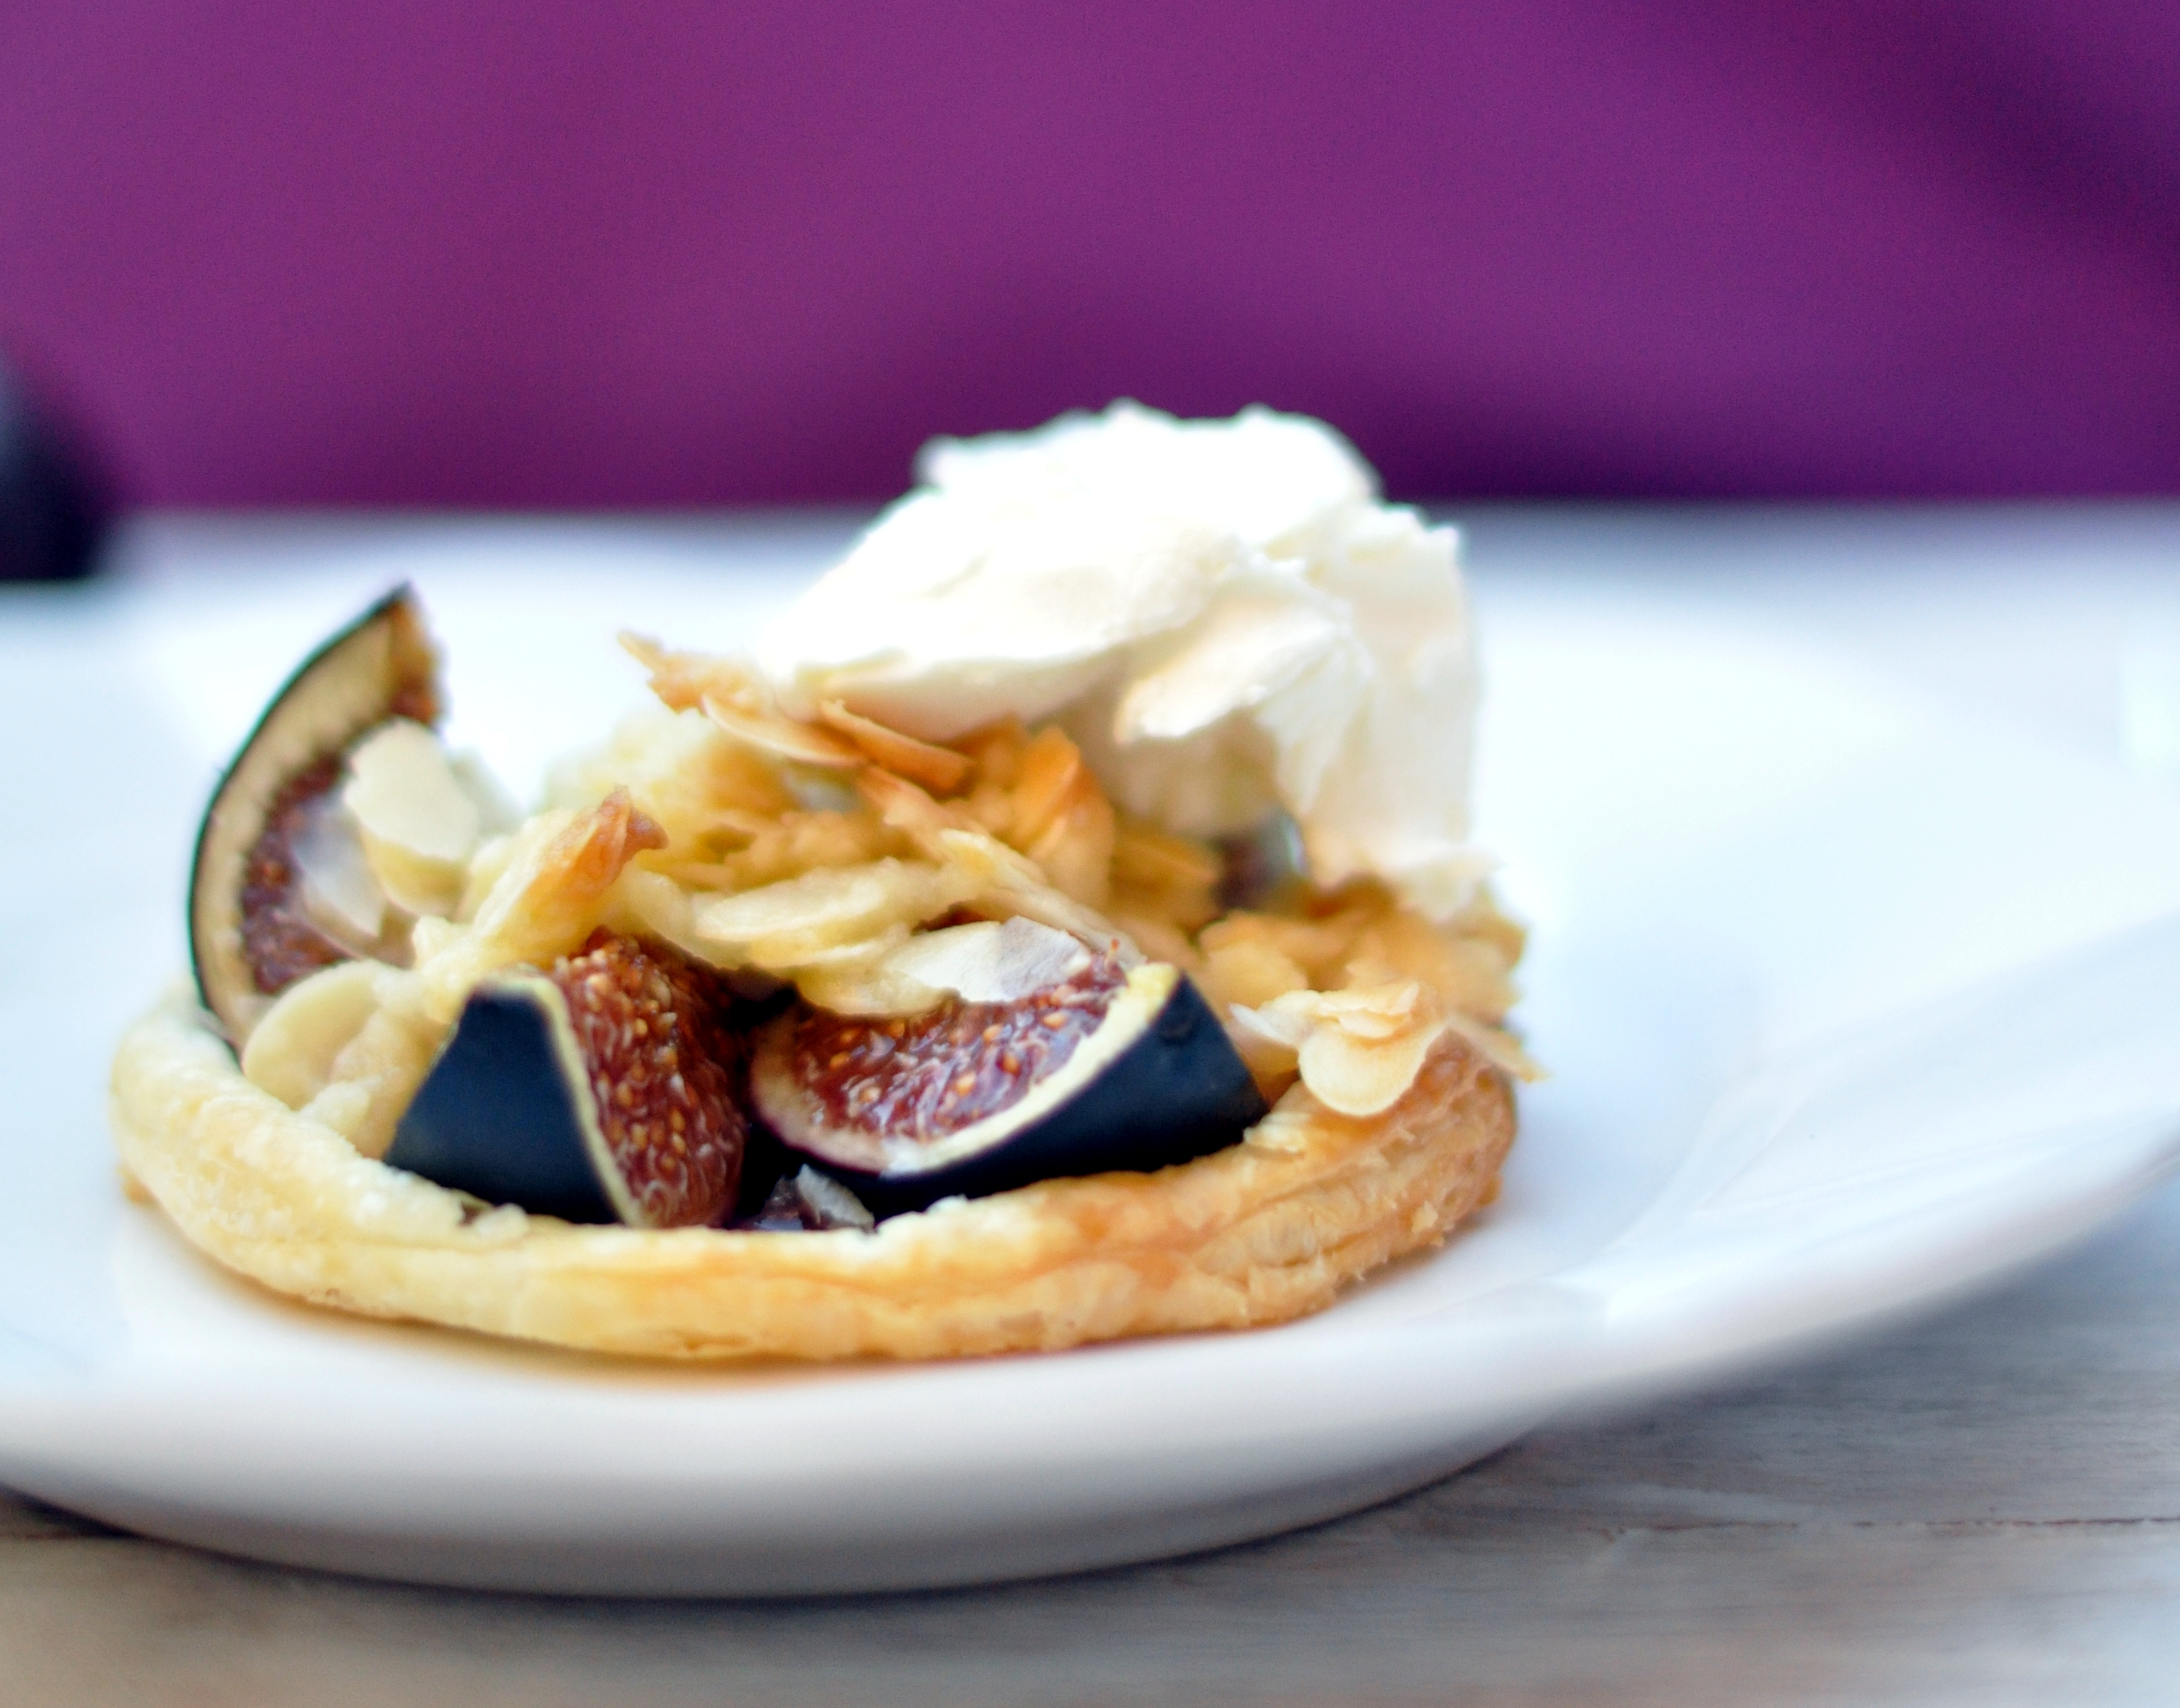 Fig and almond tart